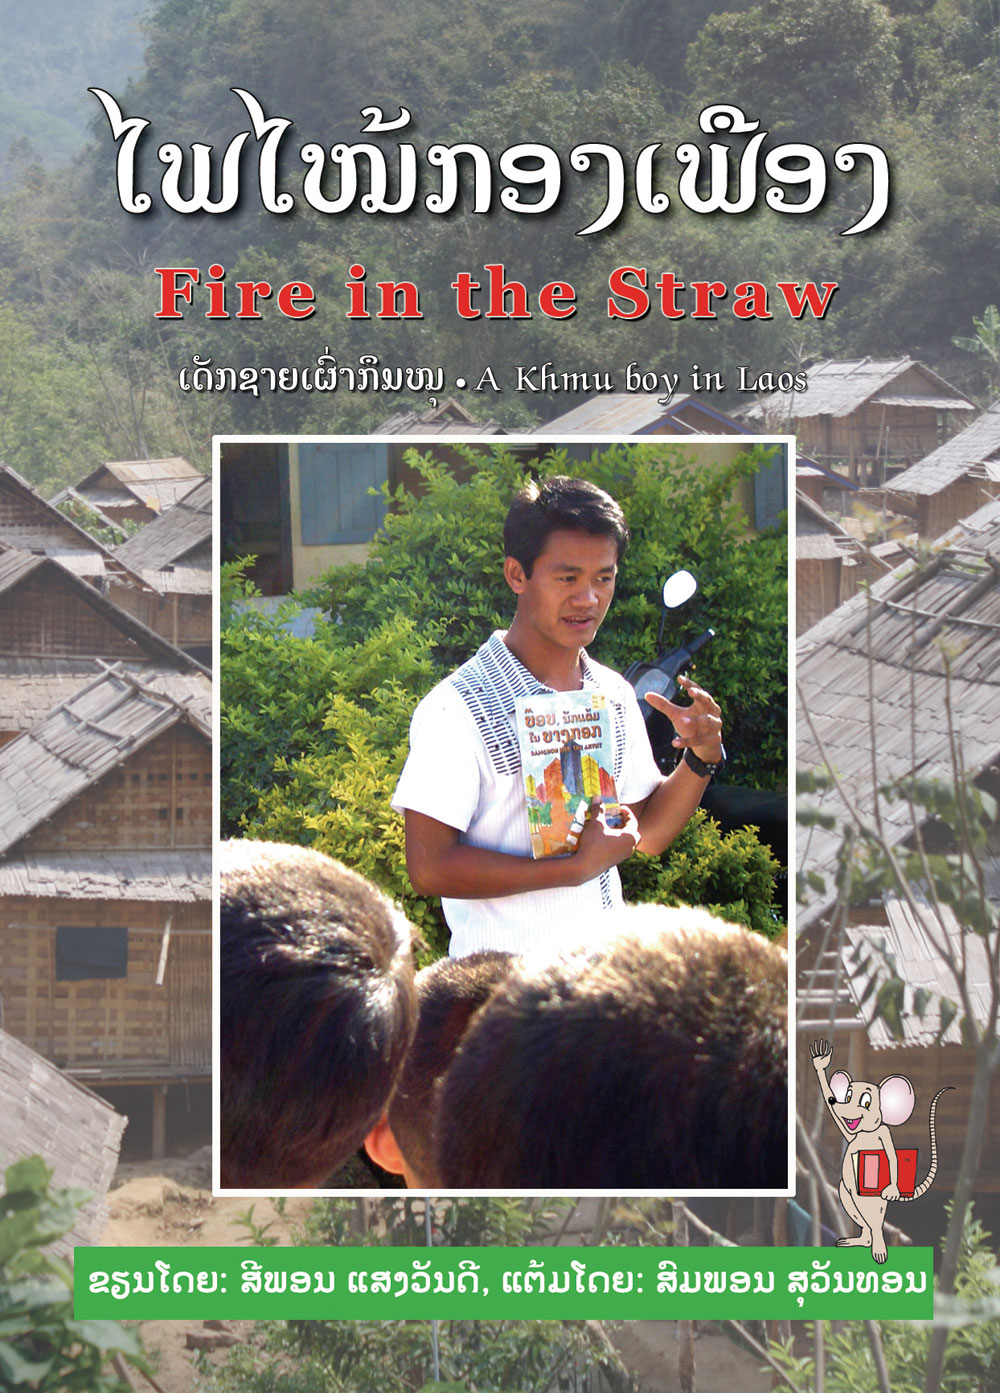 Fire in the Straw! large book cover, published in Lao and English